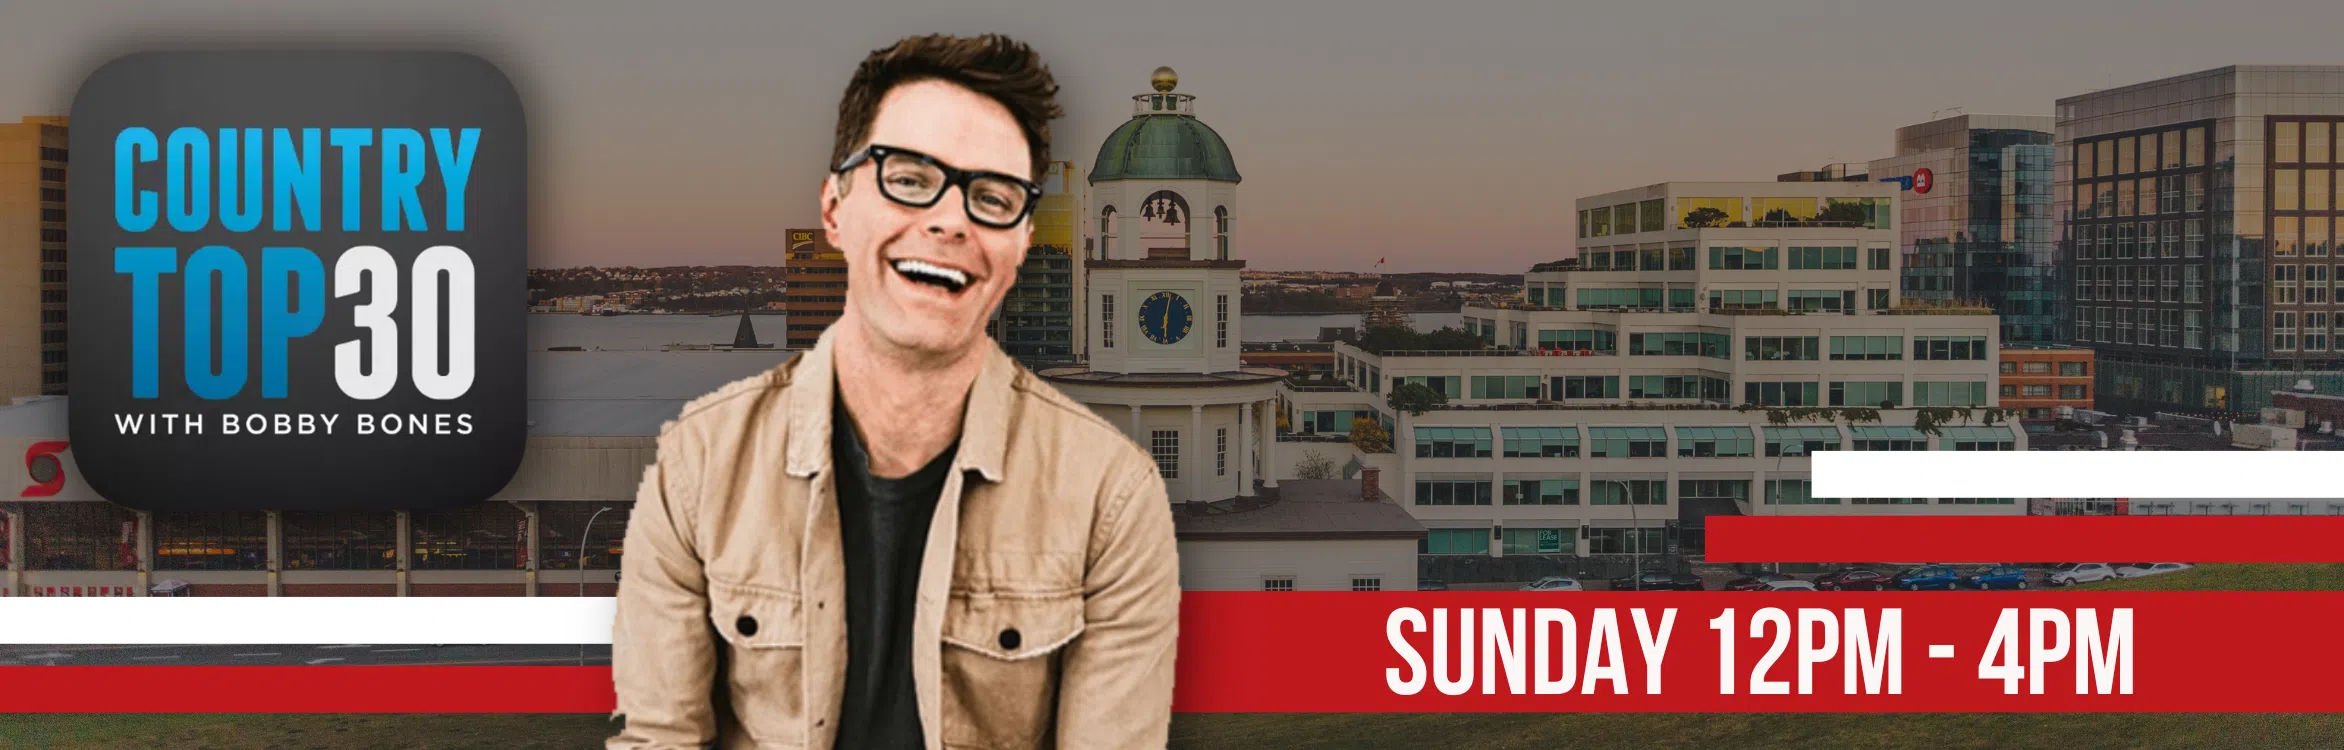 The Country Top 30 With Bobby Bones